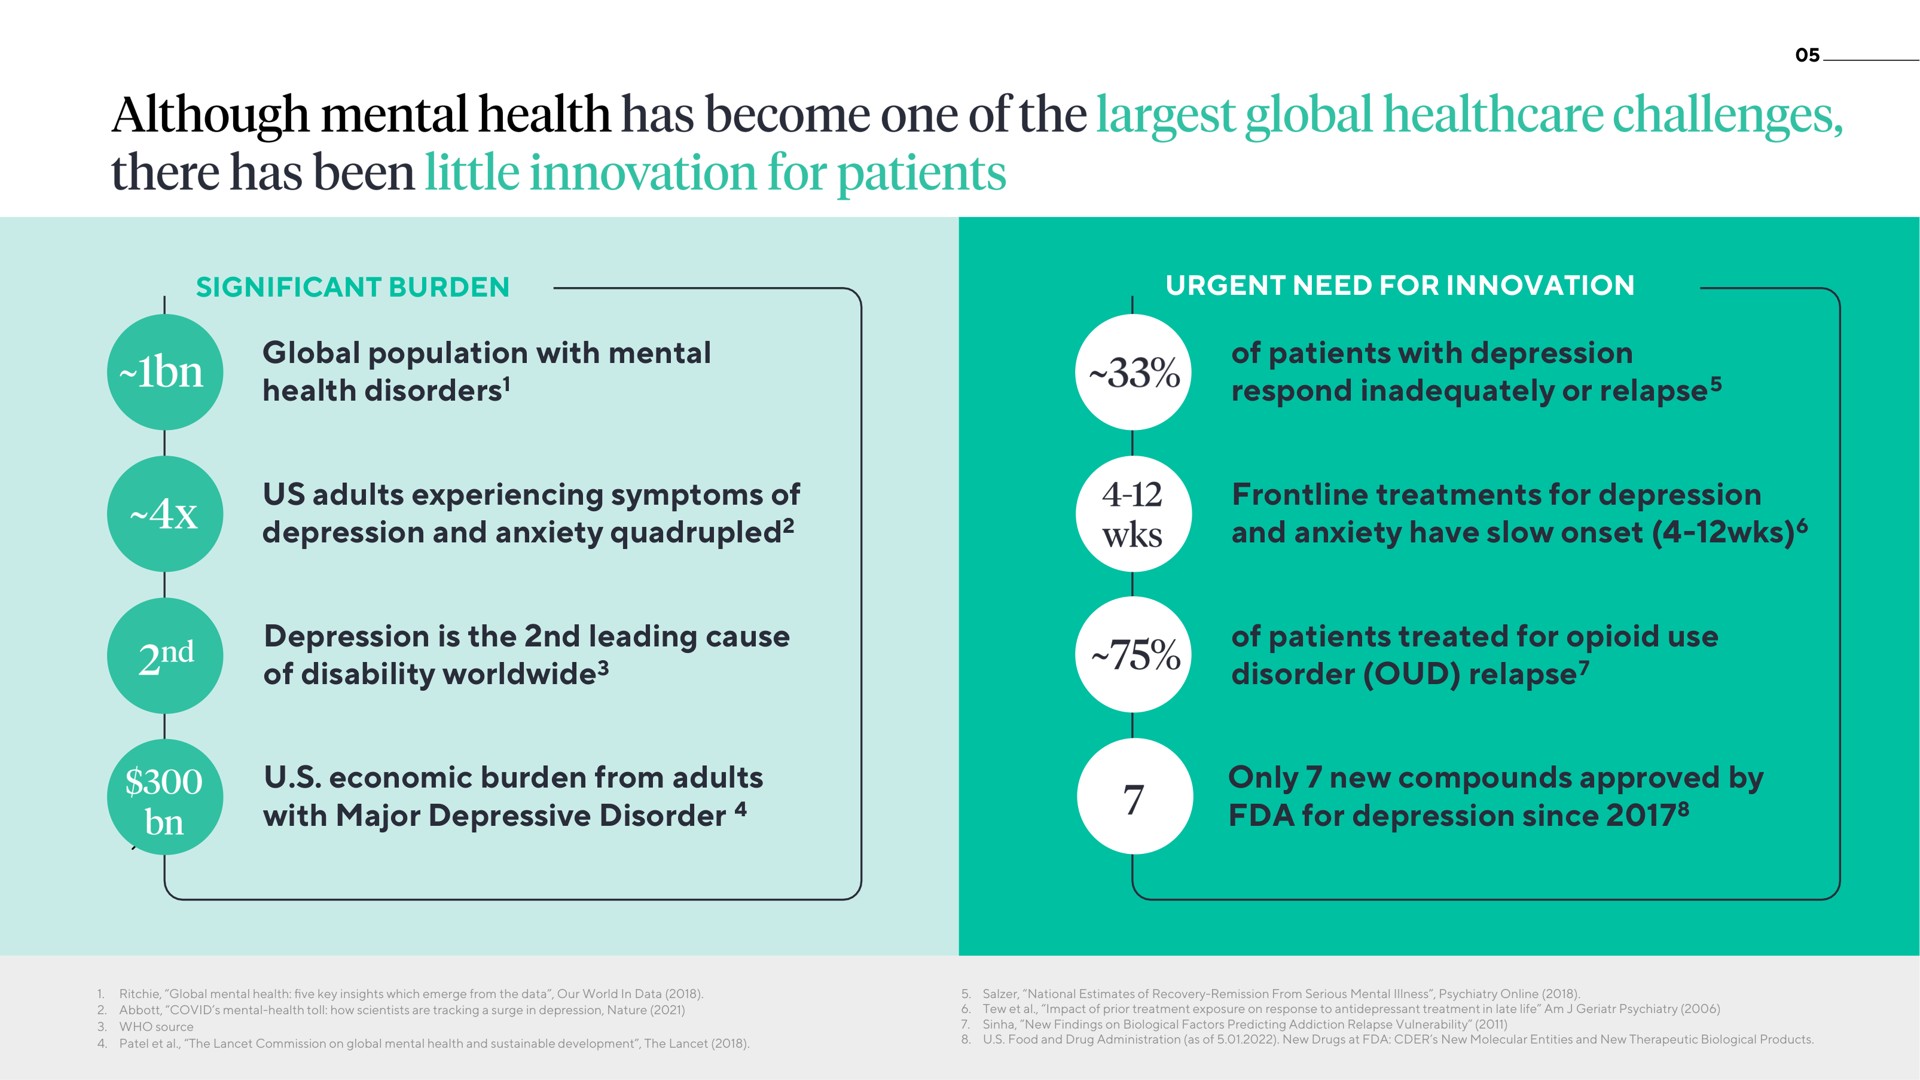 significant burden urgent need for innovation global population with mental health disorders of patients with depression respond inadequately or relapse us adults experiencing symptoms of depression and anxiety quadrupled treatments for depression and anxiety have slow onset depression is the leading cause of disability of patients treated for use disorder relapse economic burden from adults with major depressive disorder only new compounds approved by for depression since although has become one challenges there has been little | ATAI